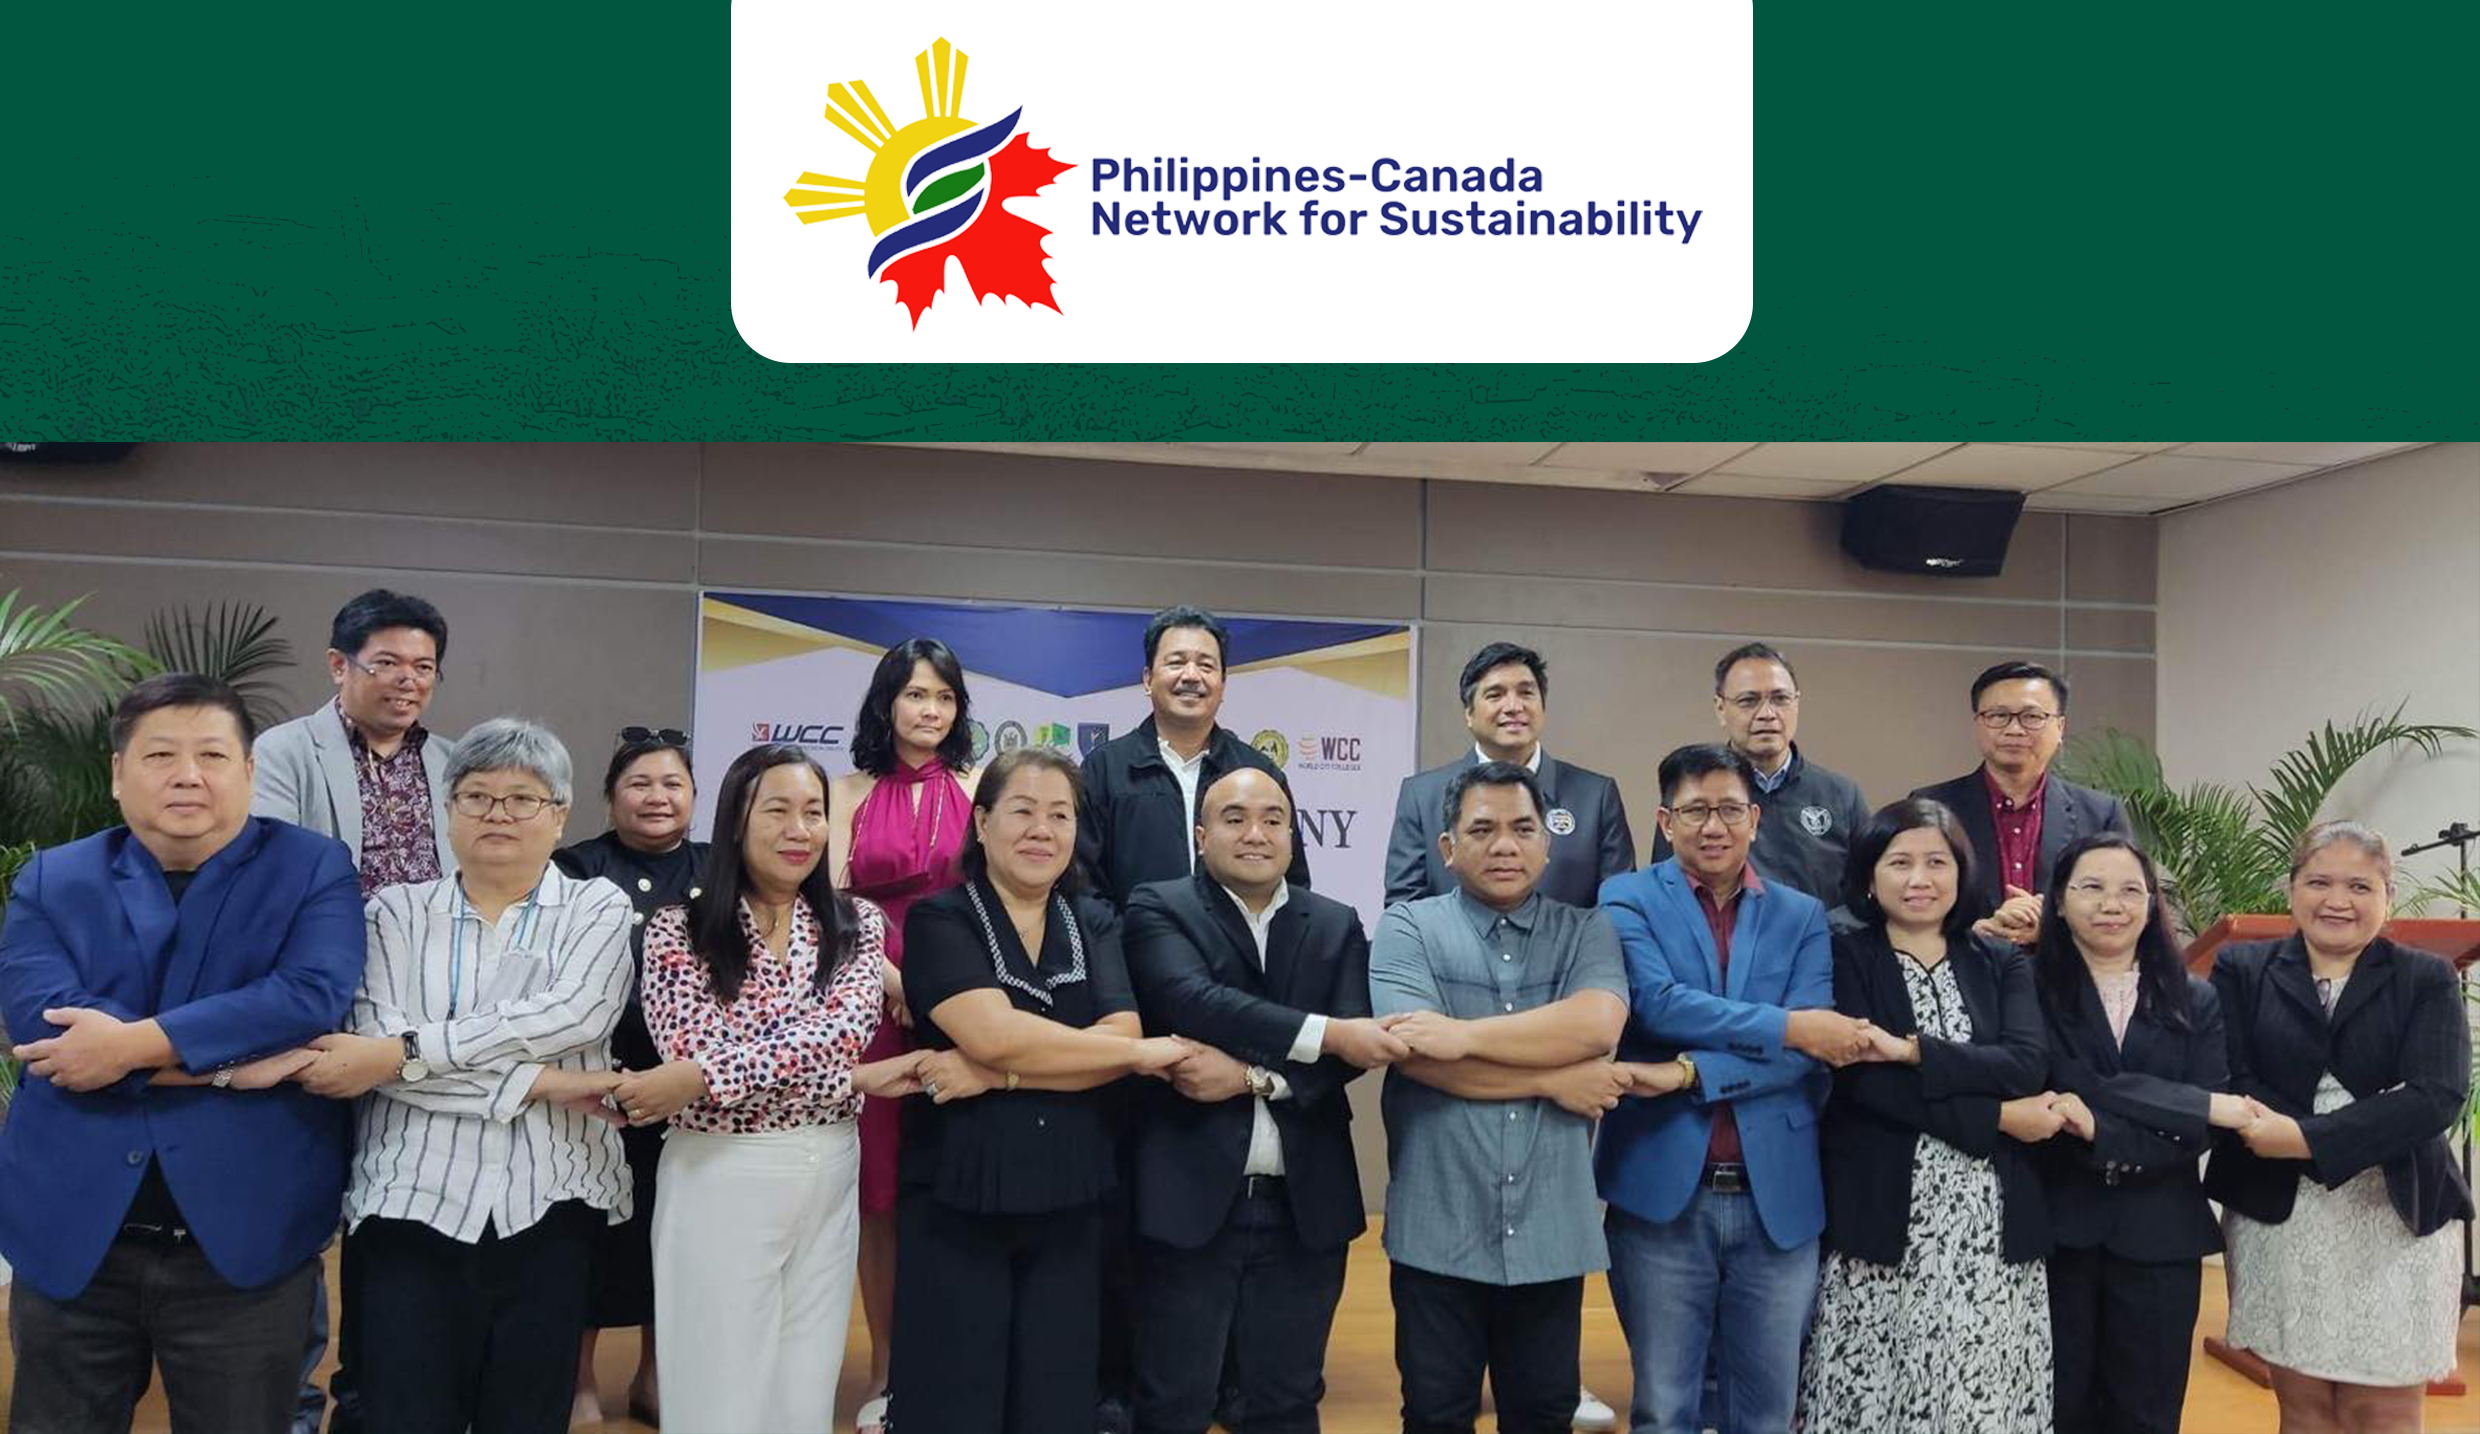 PH-Canada Network for Sustainability to launch satellite office in UPLB